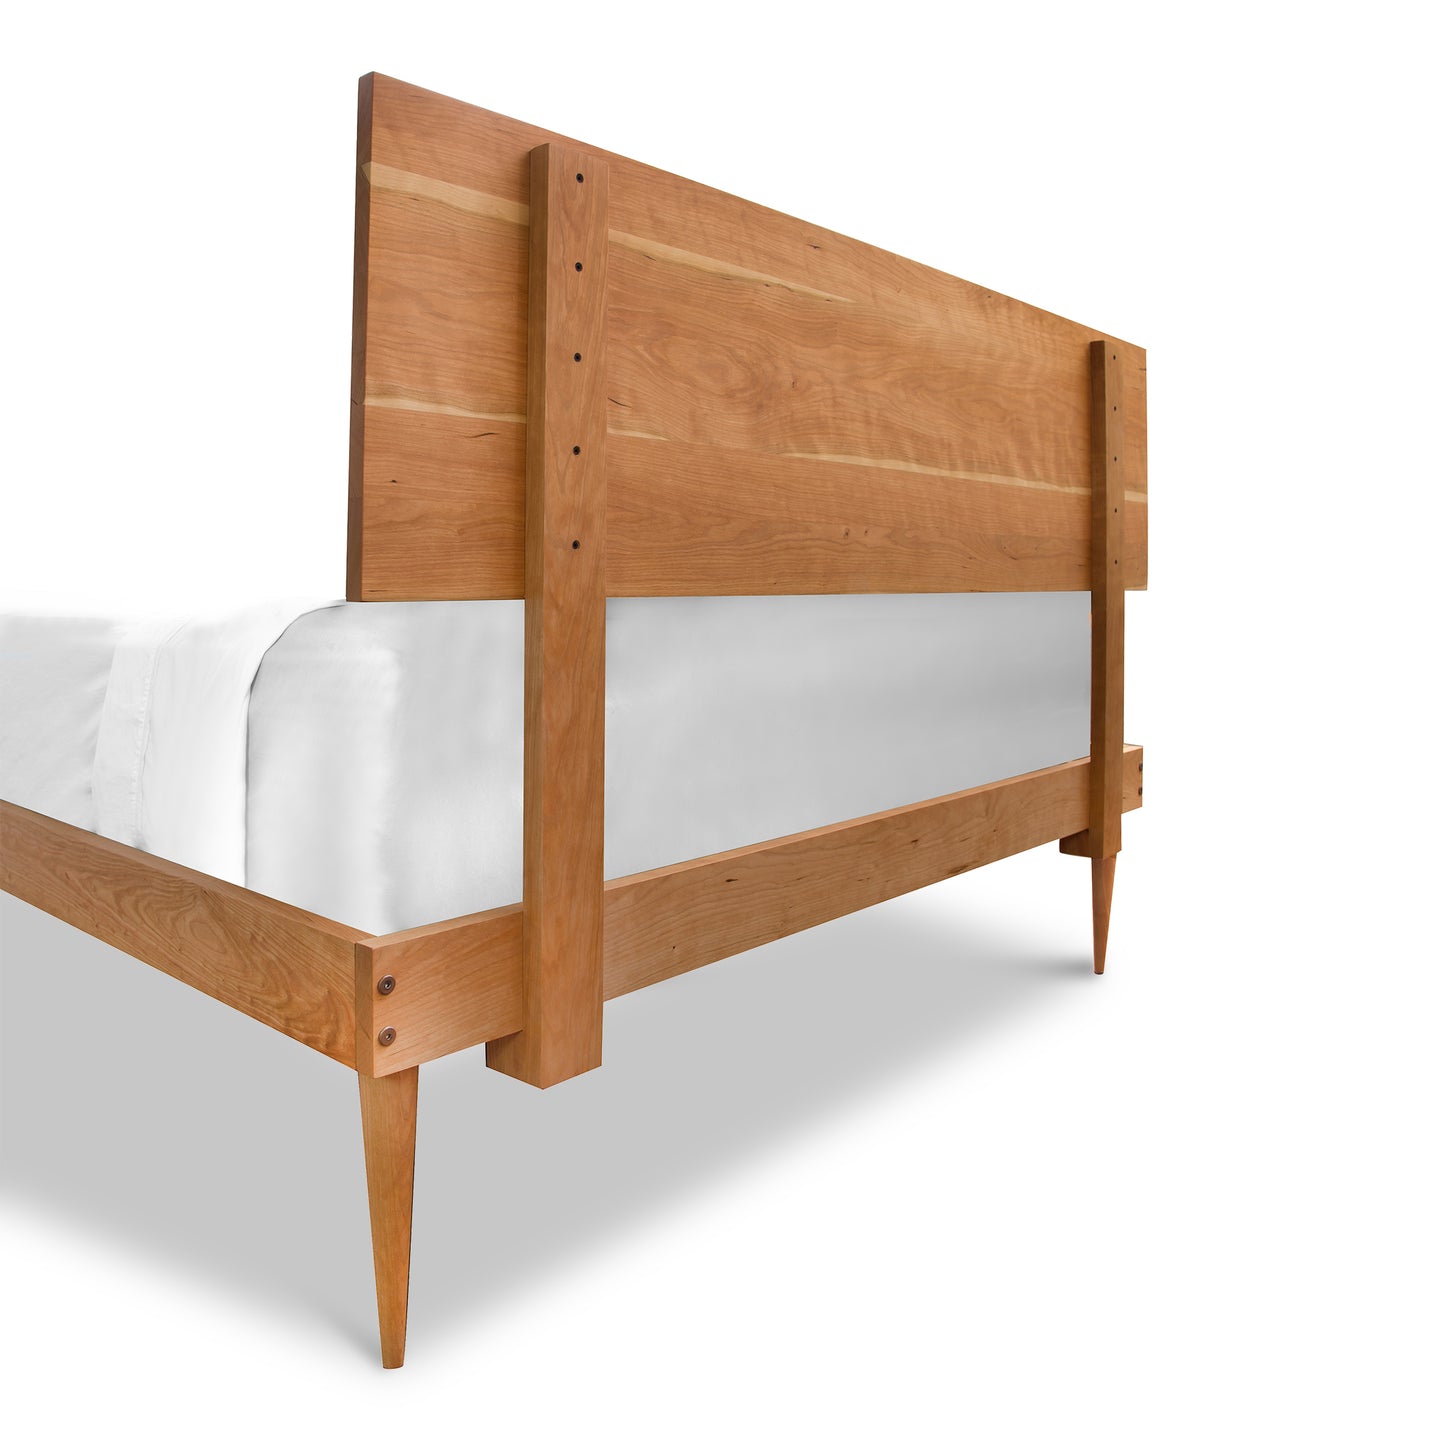 Vermont Furniture Designs Larssen Bed, a wooden platform bed frame with a mid-century modern design, showcasing a high headboard and partially dressed with white bedding, isolated on a white background.